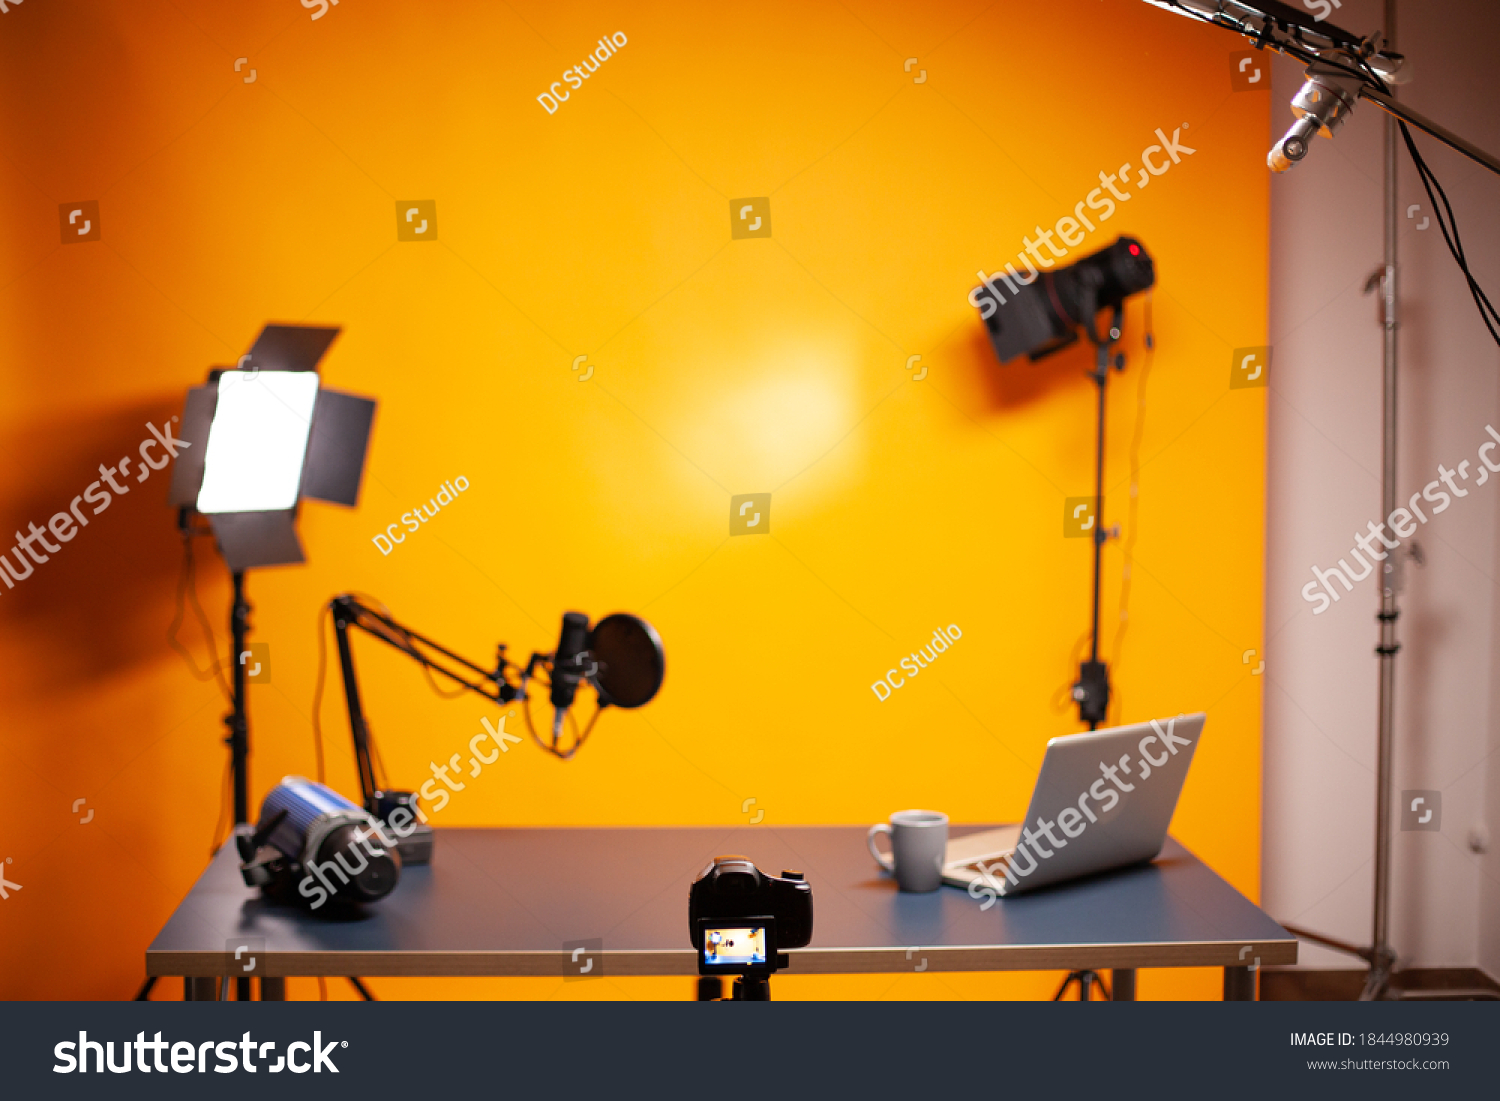 Professional podcast and vlogging setup in studio with yellow background. #1844980939